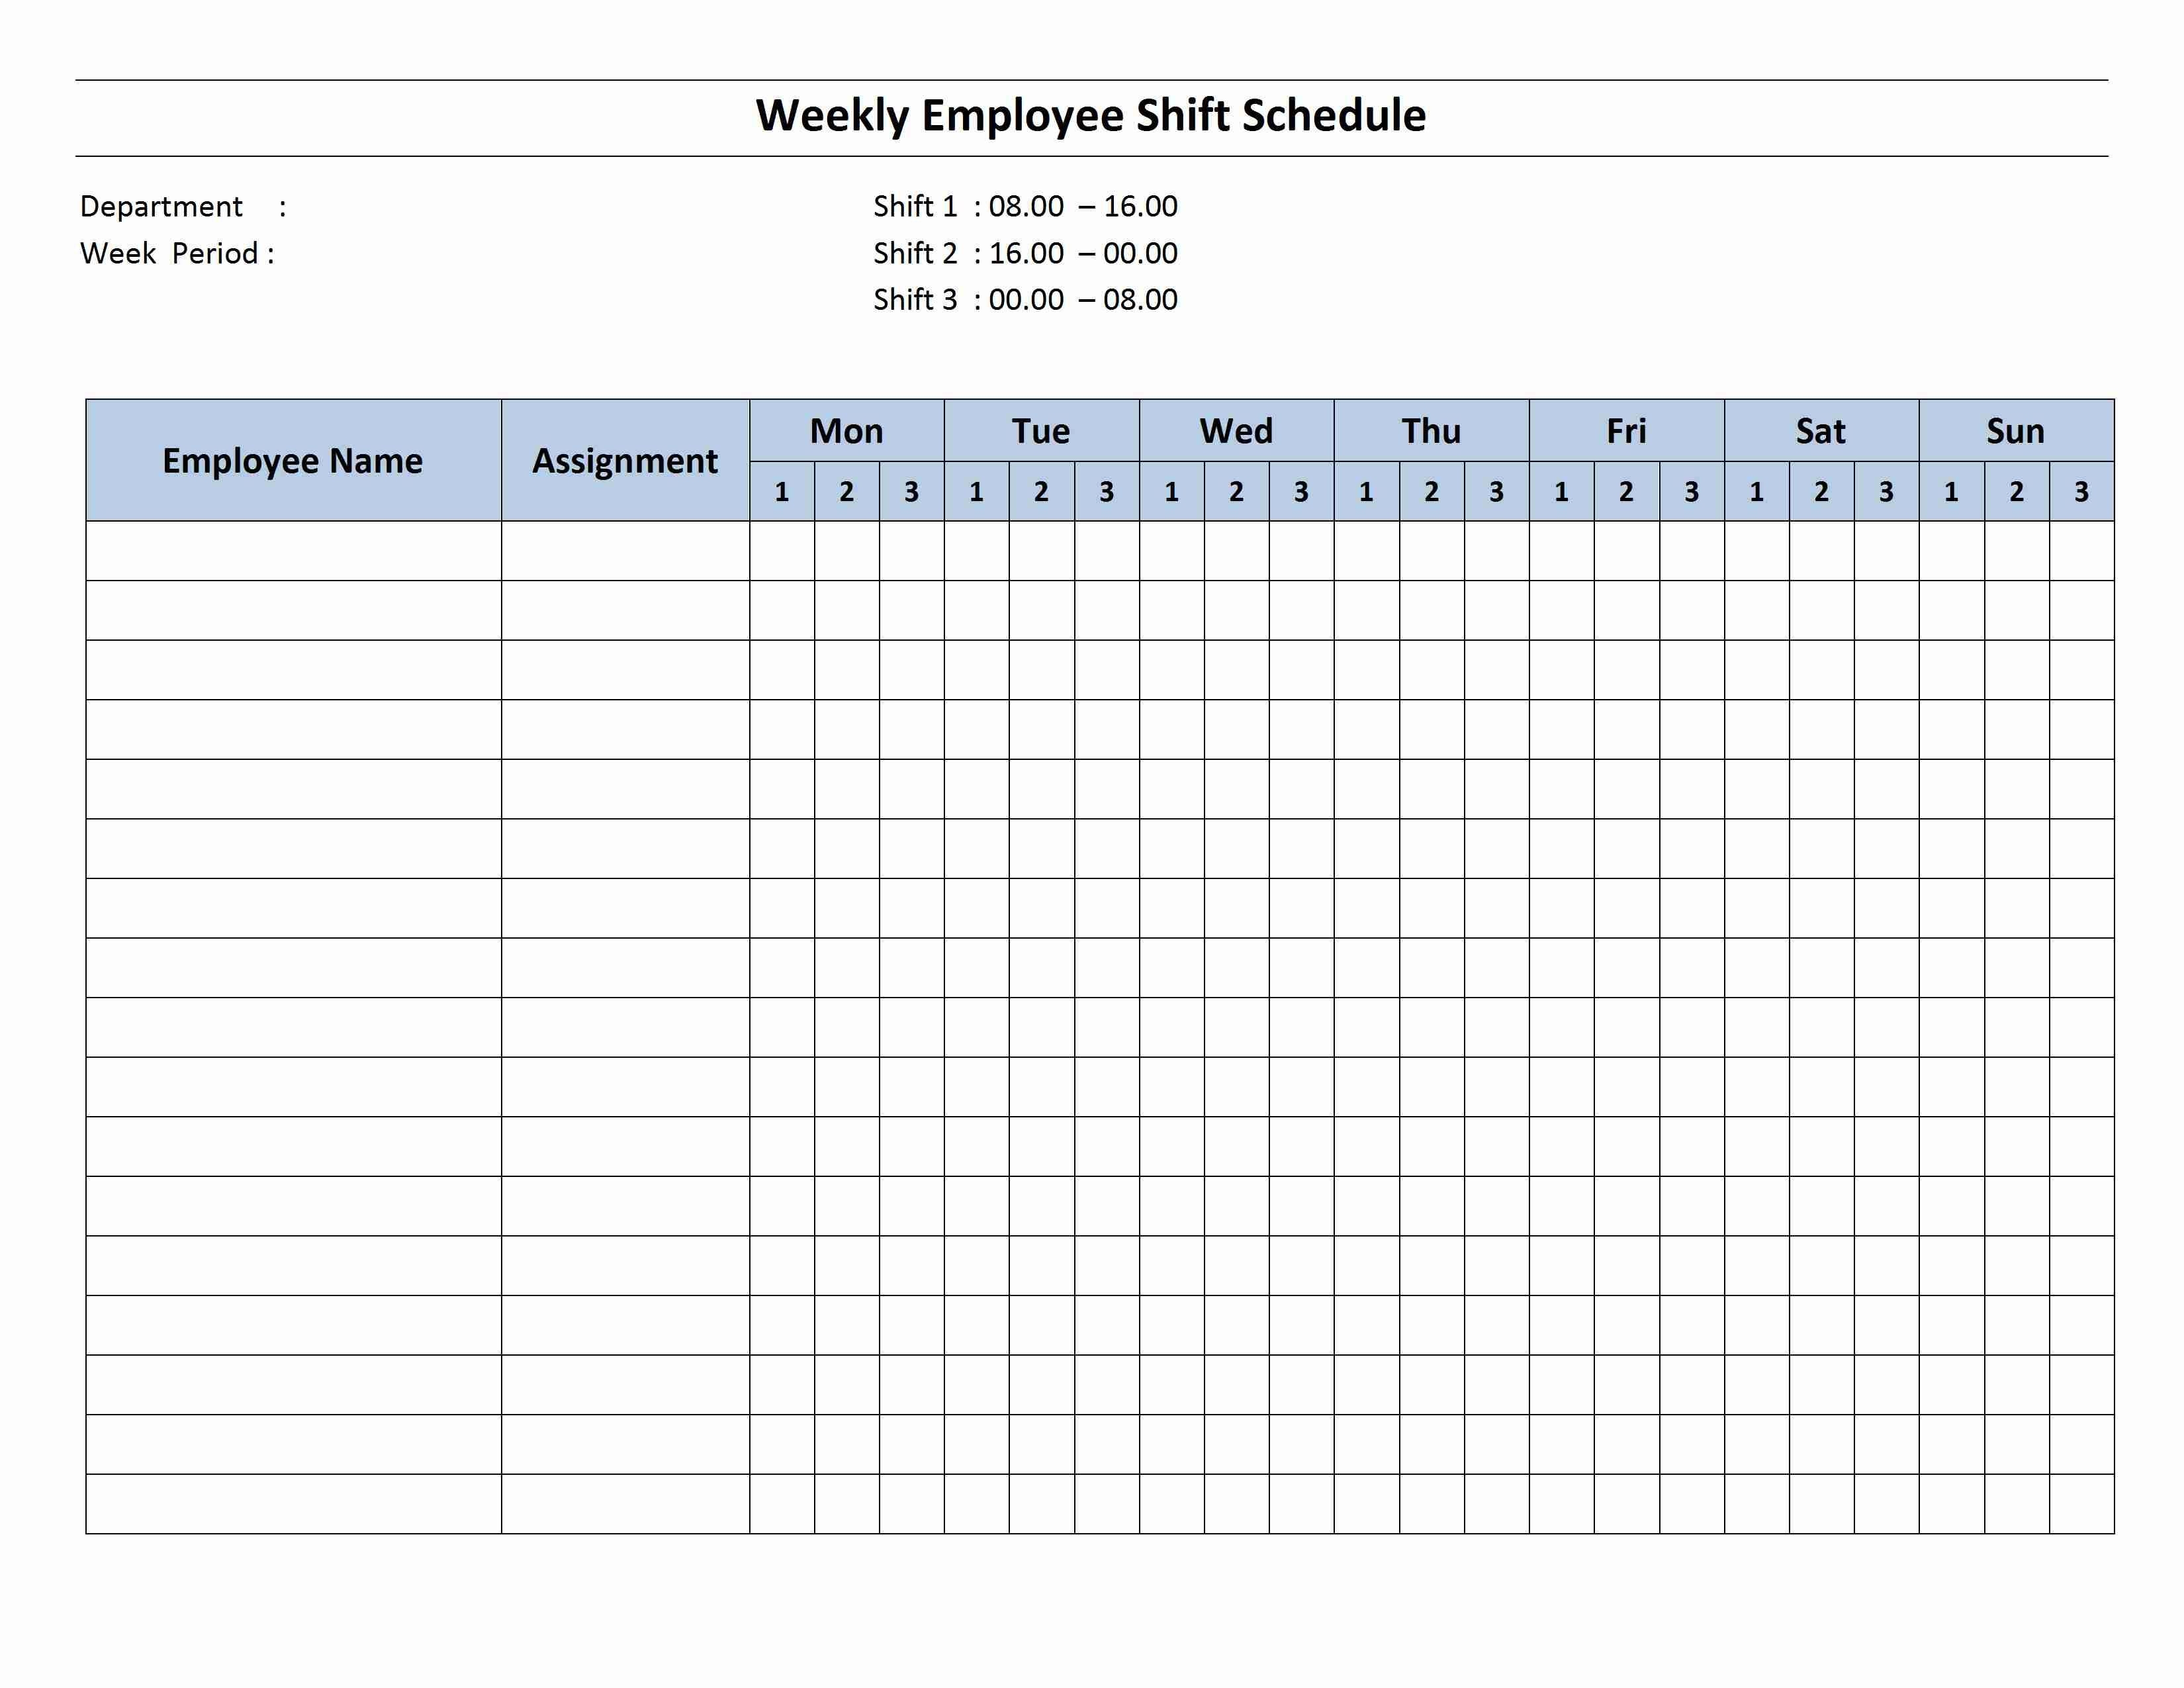 026 Biweekly Pay Schedule Template Ideas 20Free Excel Work-Excel Templates For Biweekly Schedule